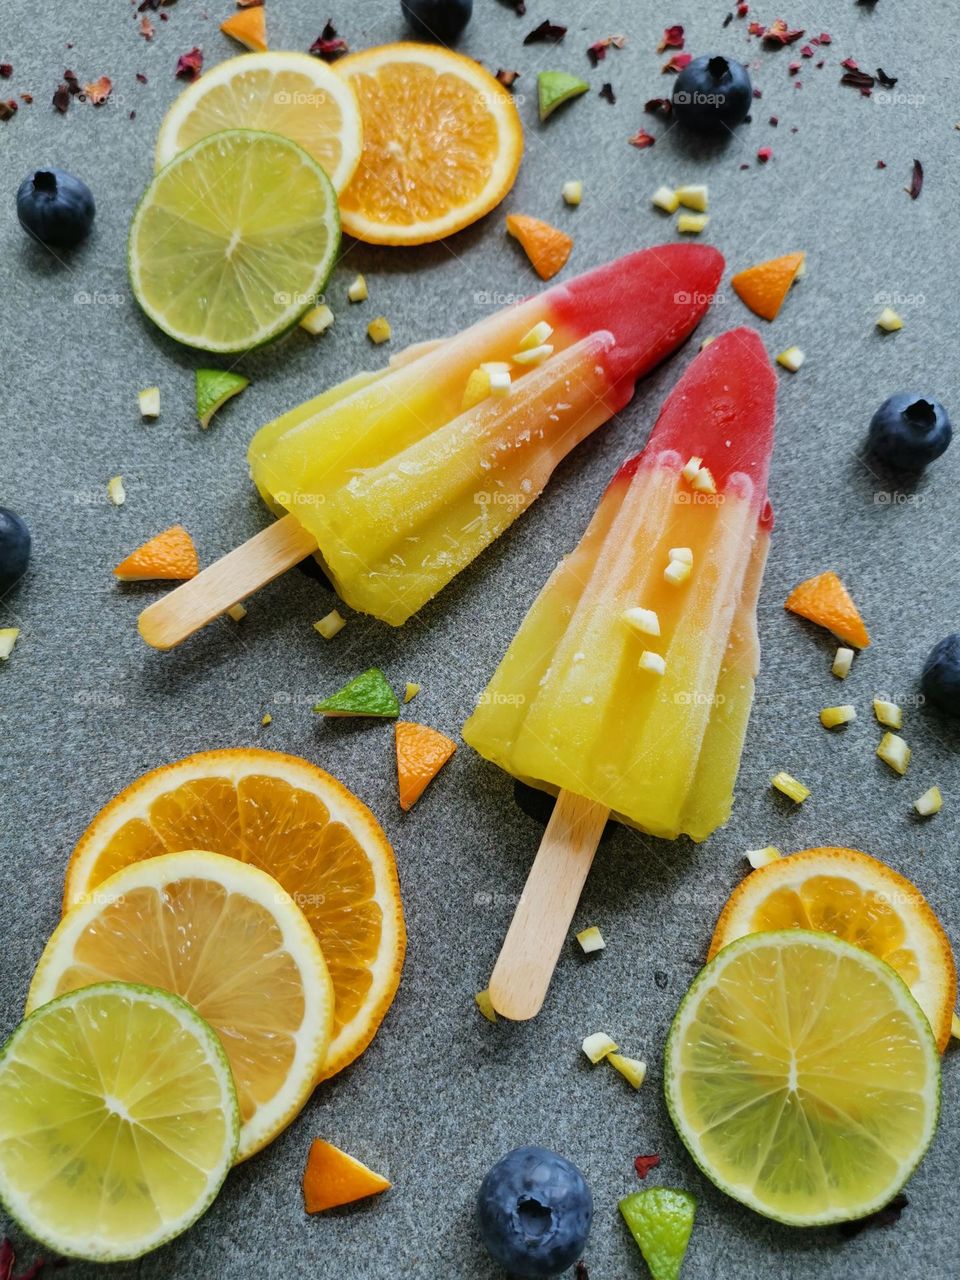 Summer time, summer mood, summer treats! Delicious iced lollies and juicy fruits. Refreshing snacks. 